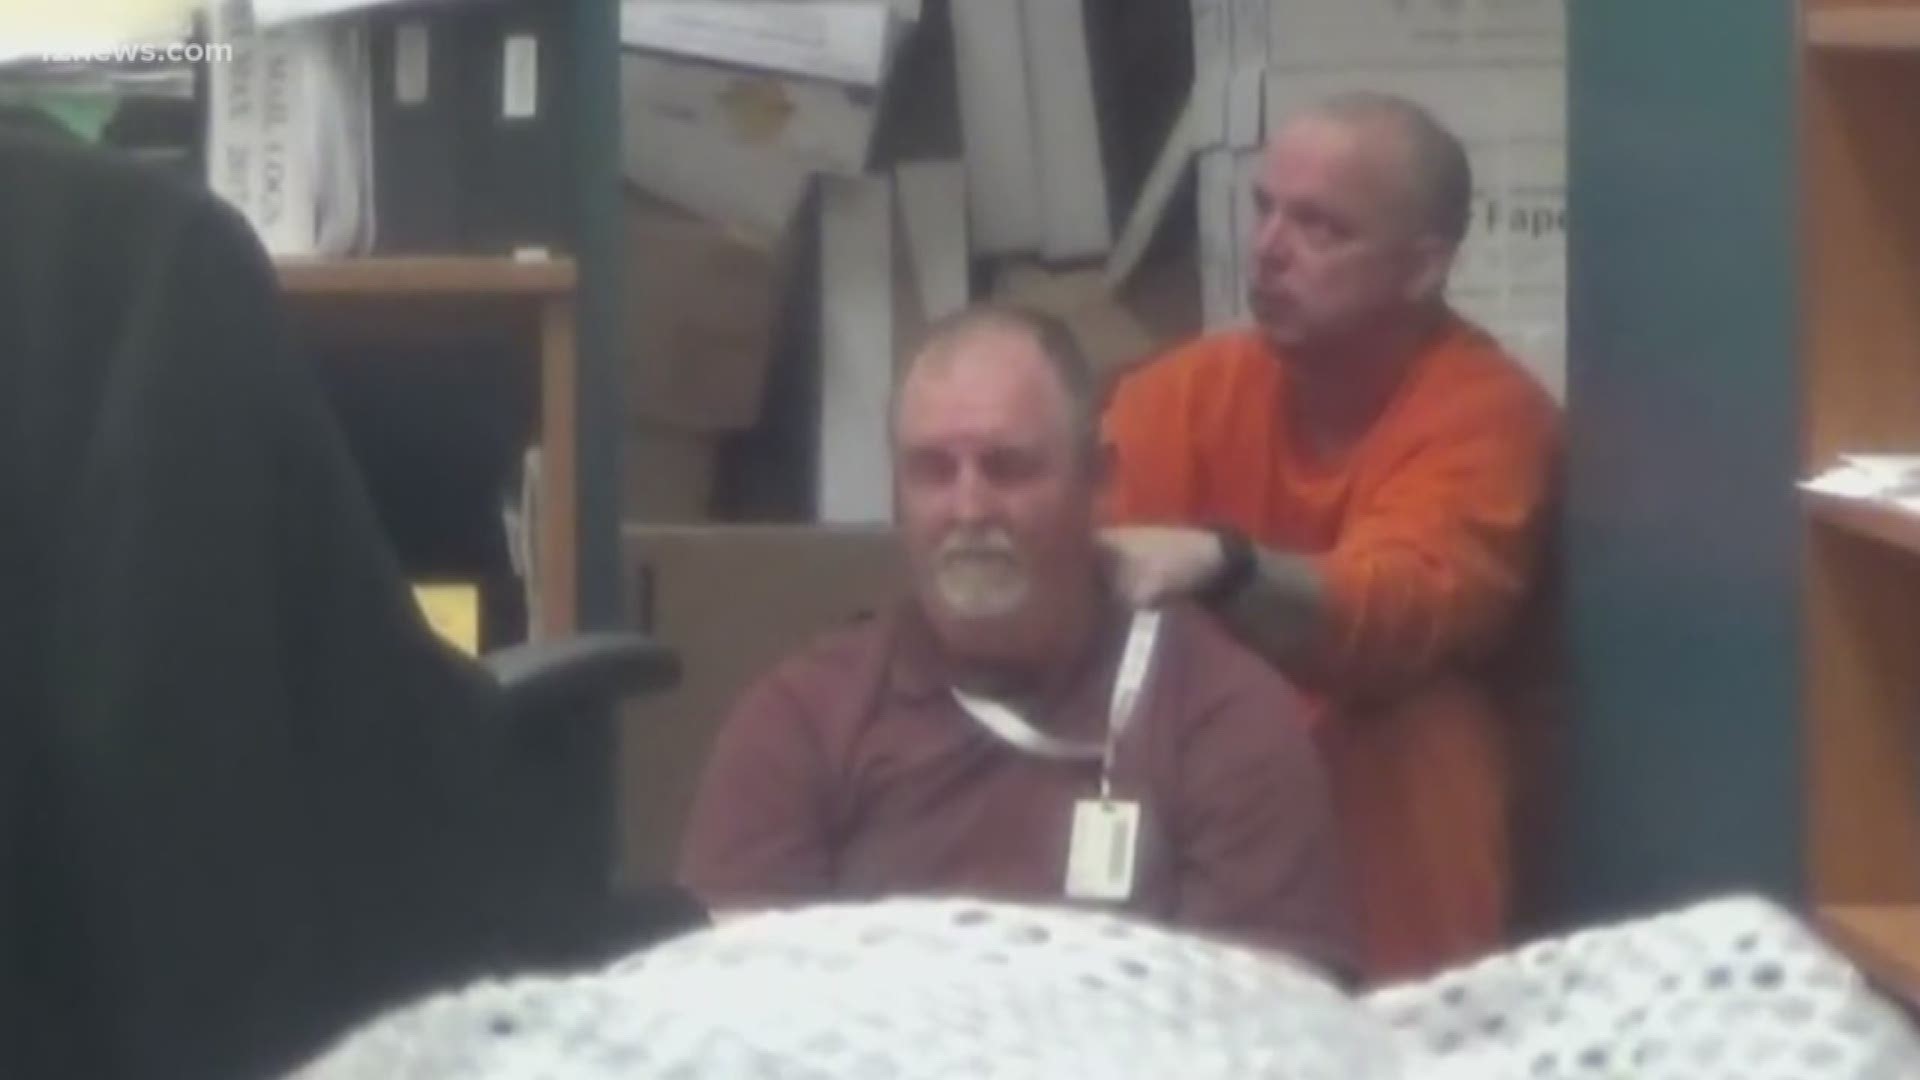 For the first time, we are seeing inside Lewis State Prison near Buckeye when one of Arizona's most dangerous felons held a prison employee hostage. The incident took place in December and we're just now getting a look at what happened.